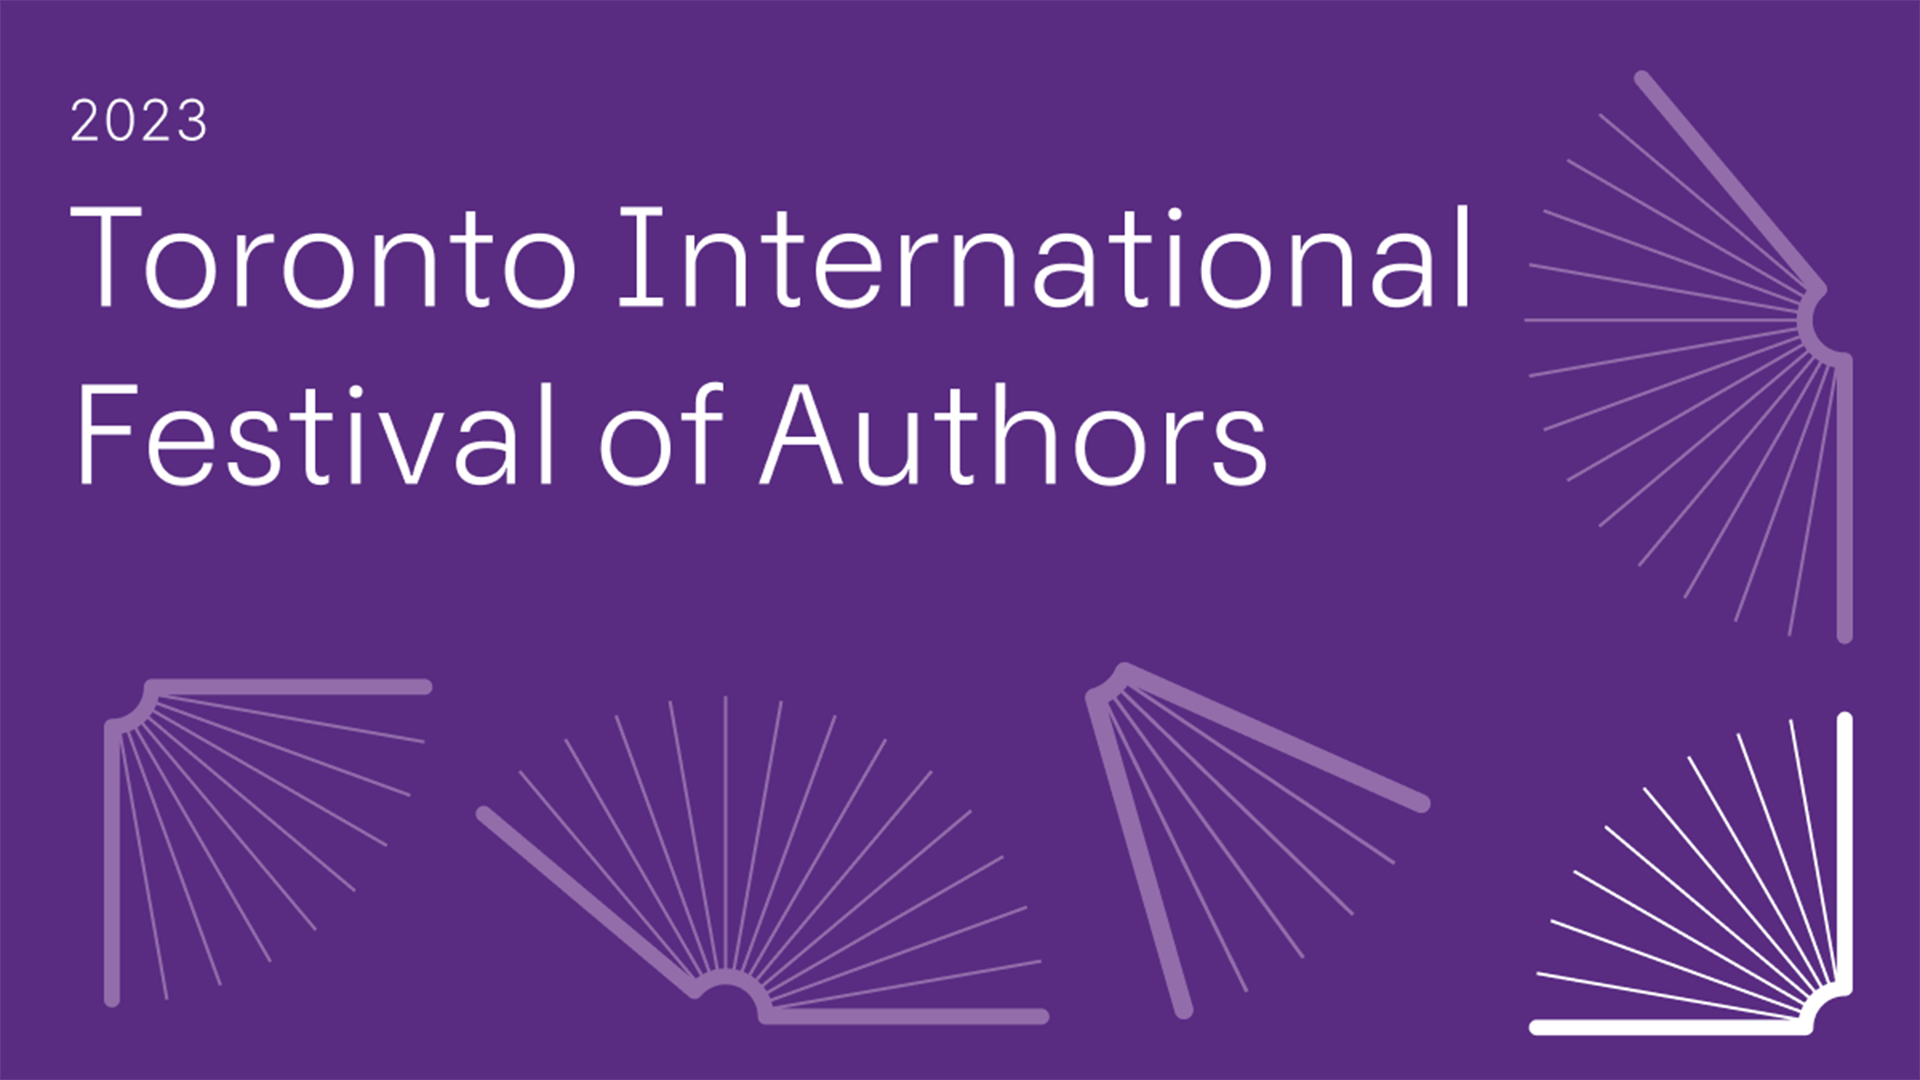 Toronto International Festival of Authors 2023 in white text over a purple background. Various book logos in white are spread throughout.